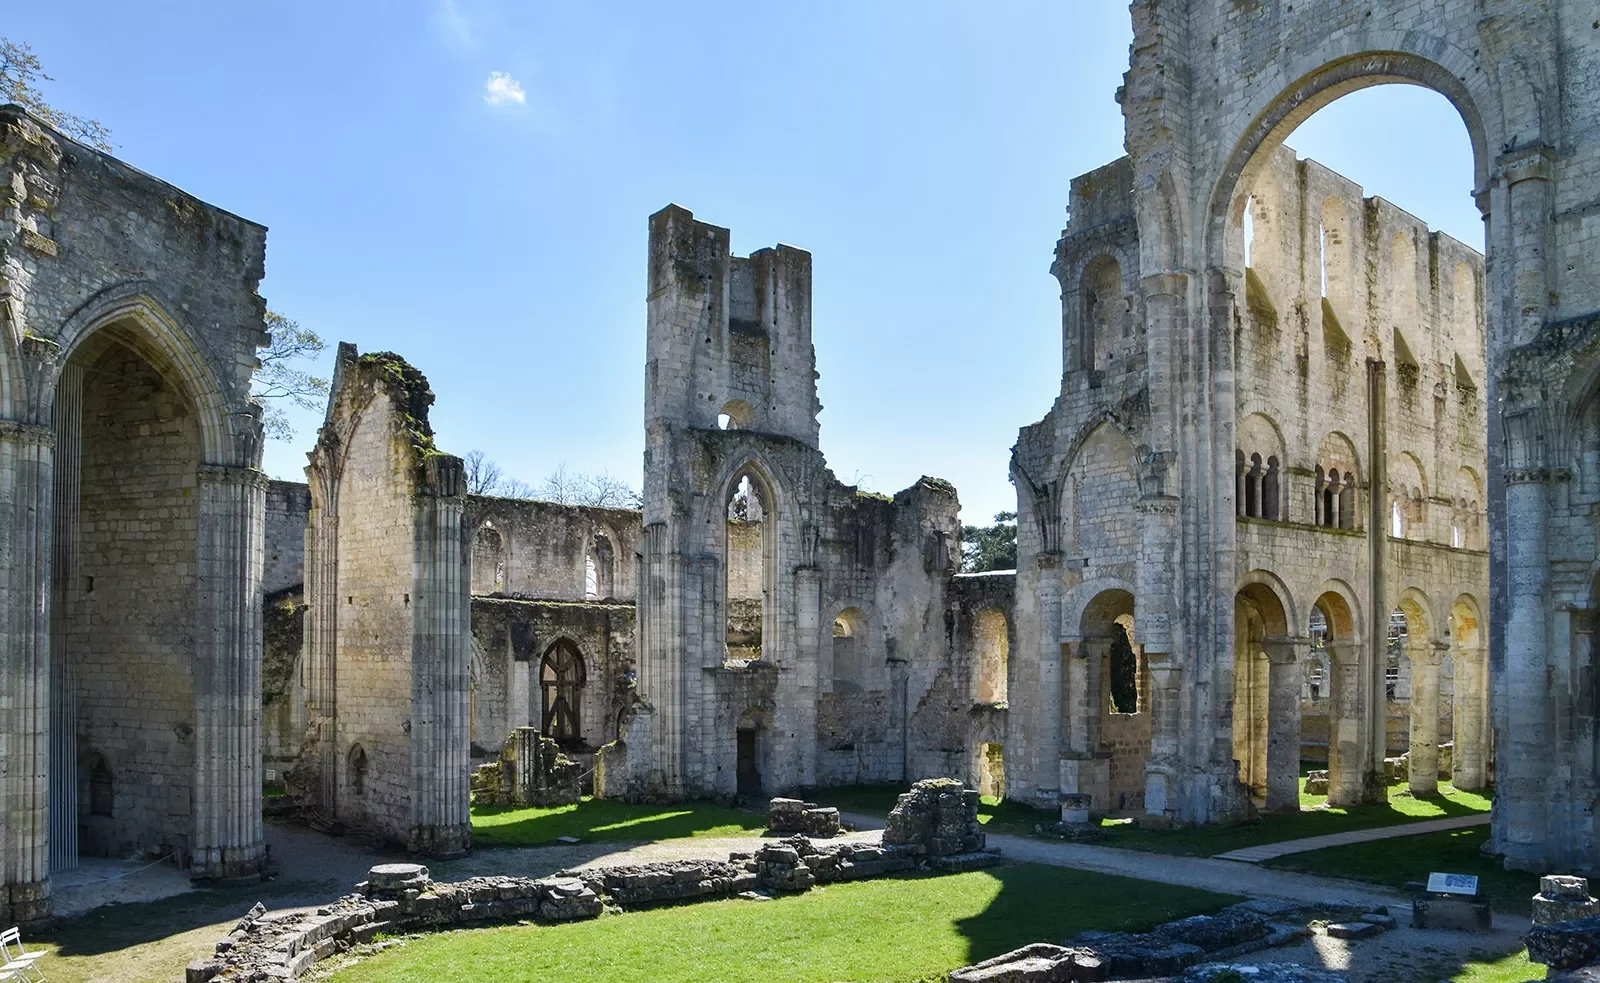 Jumieges Abbey Ruins in Normandy